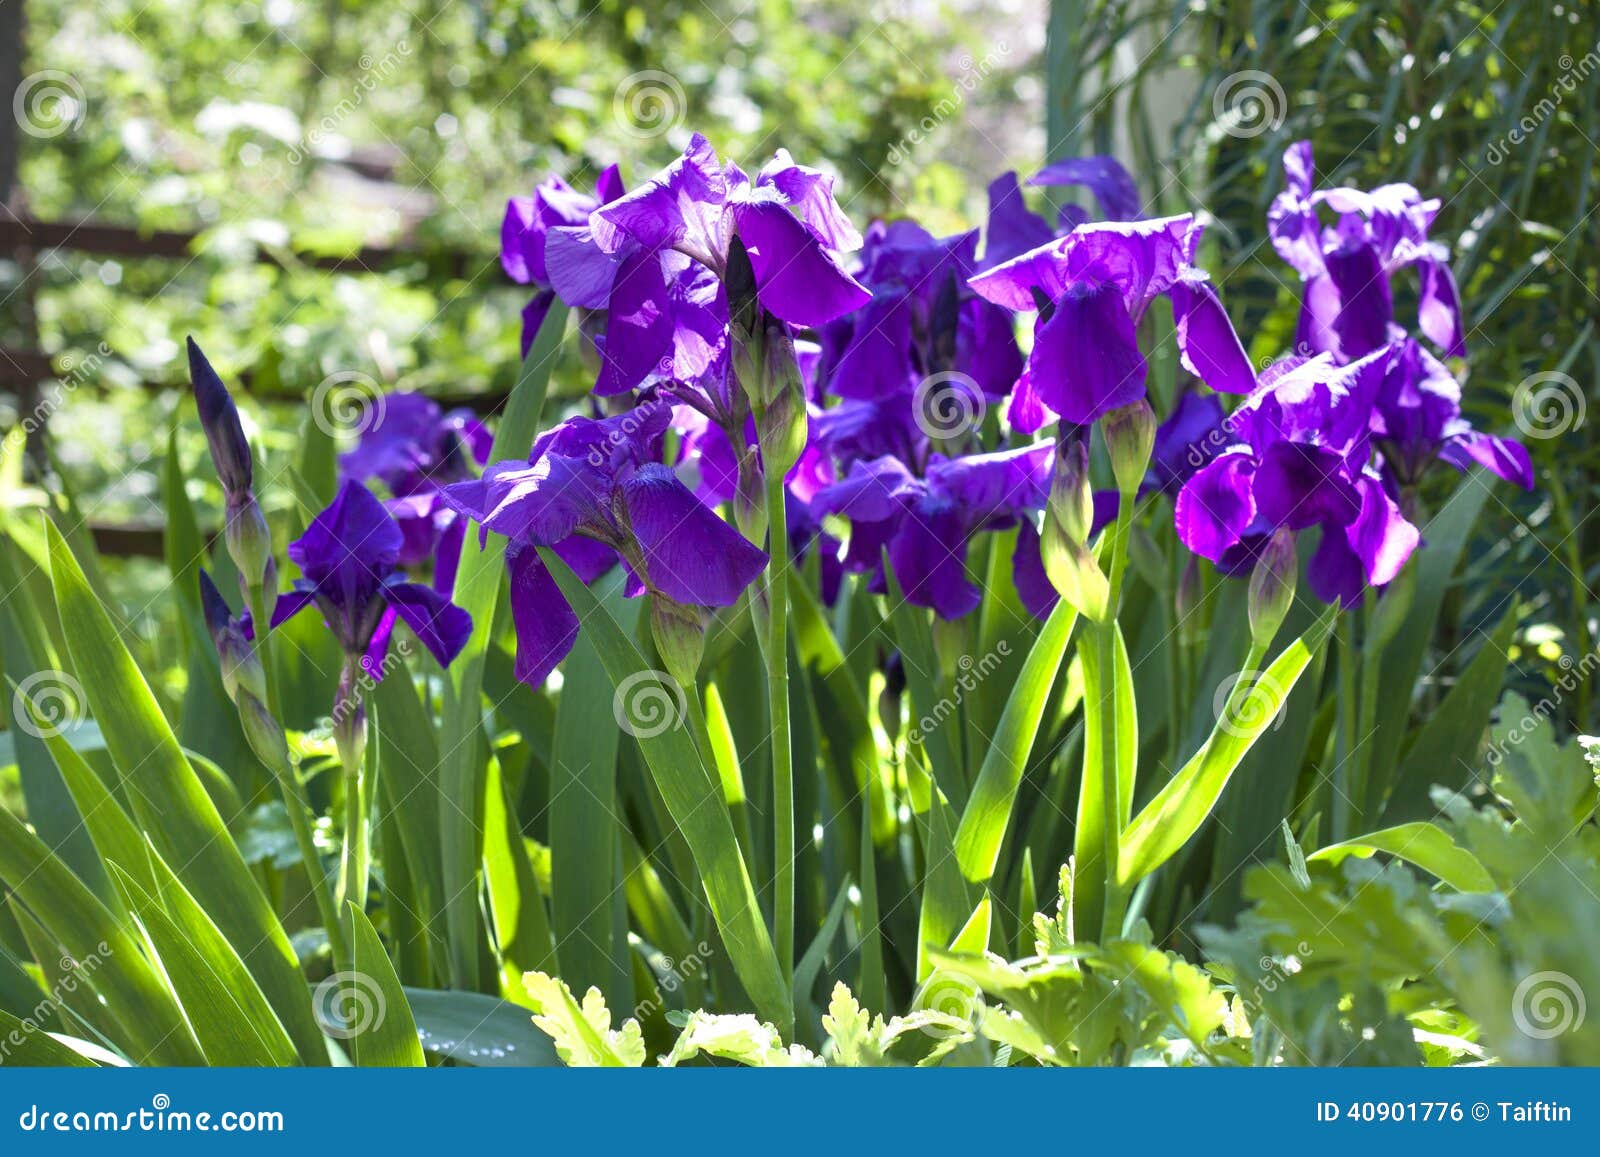 Violet Iris Flowers on Flowerbed Stock Photo - Image of flowerbed, lilac:  40901776